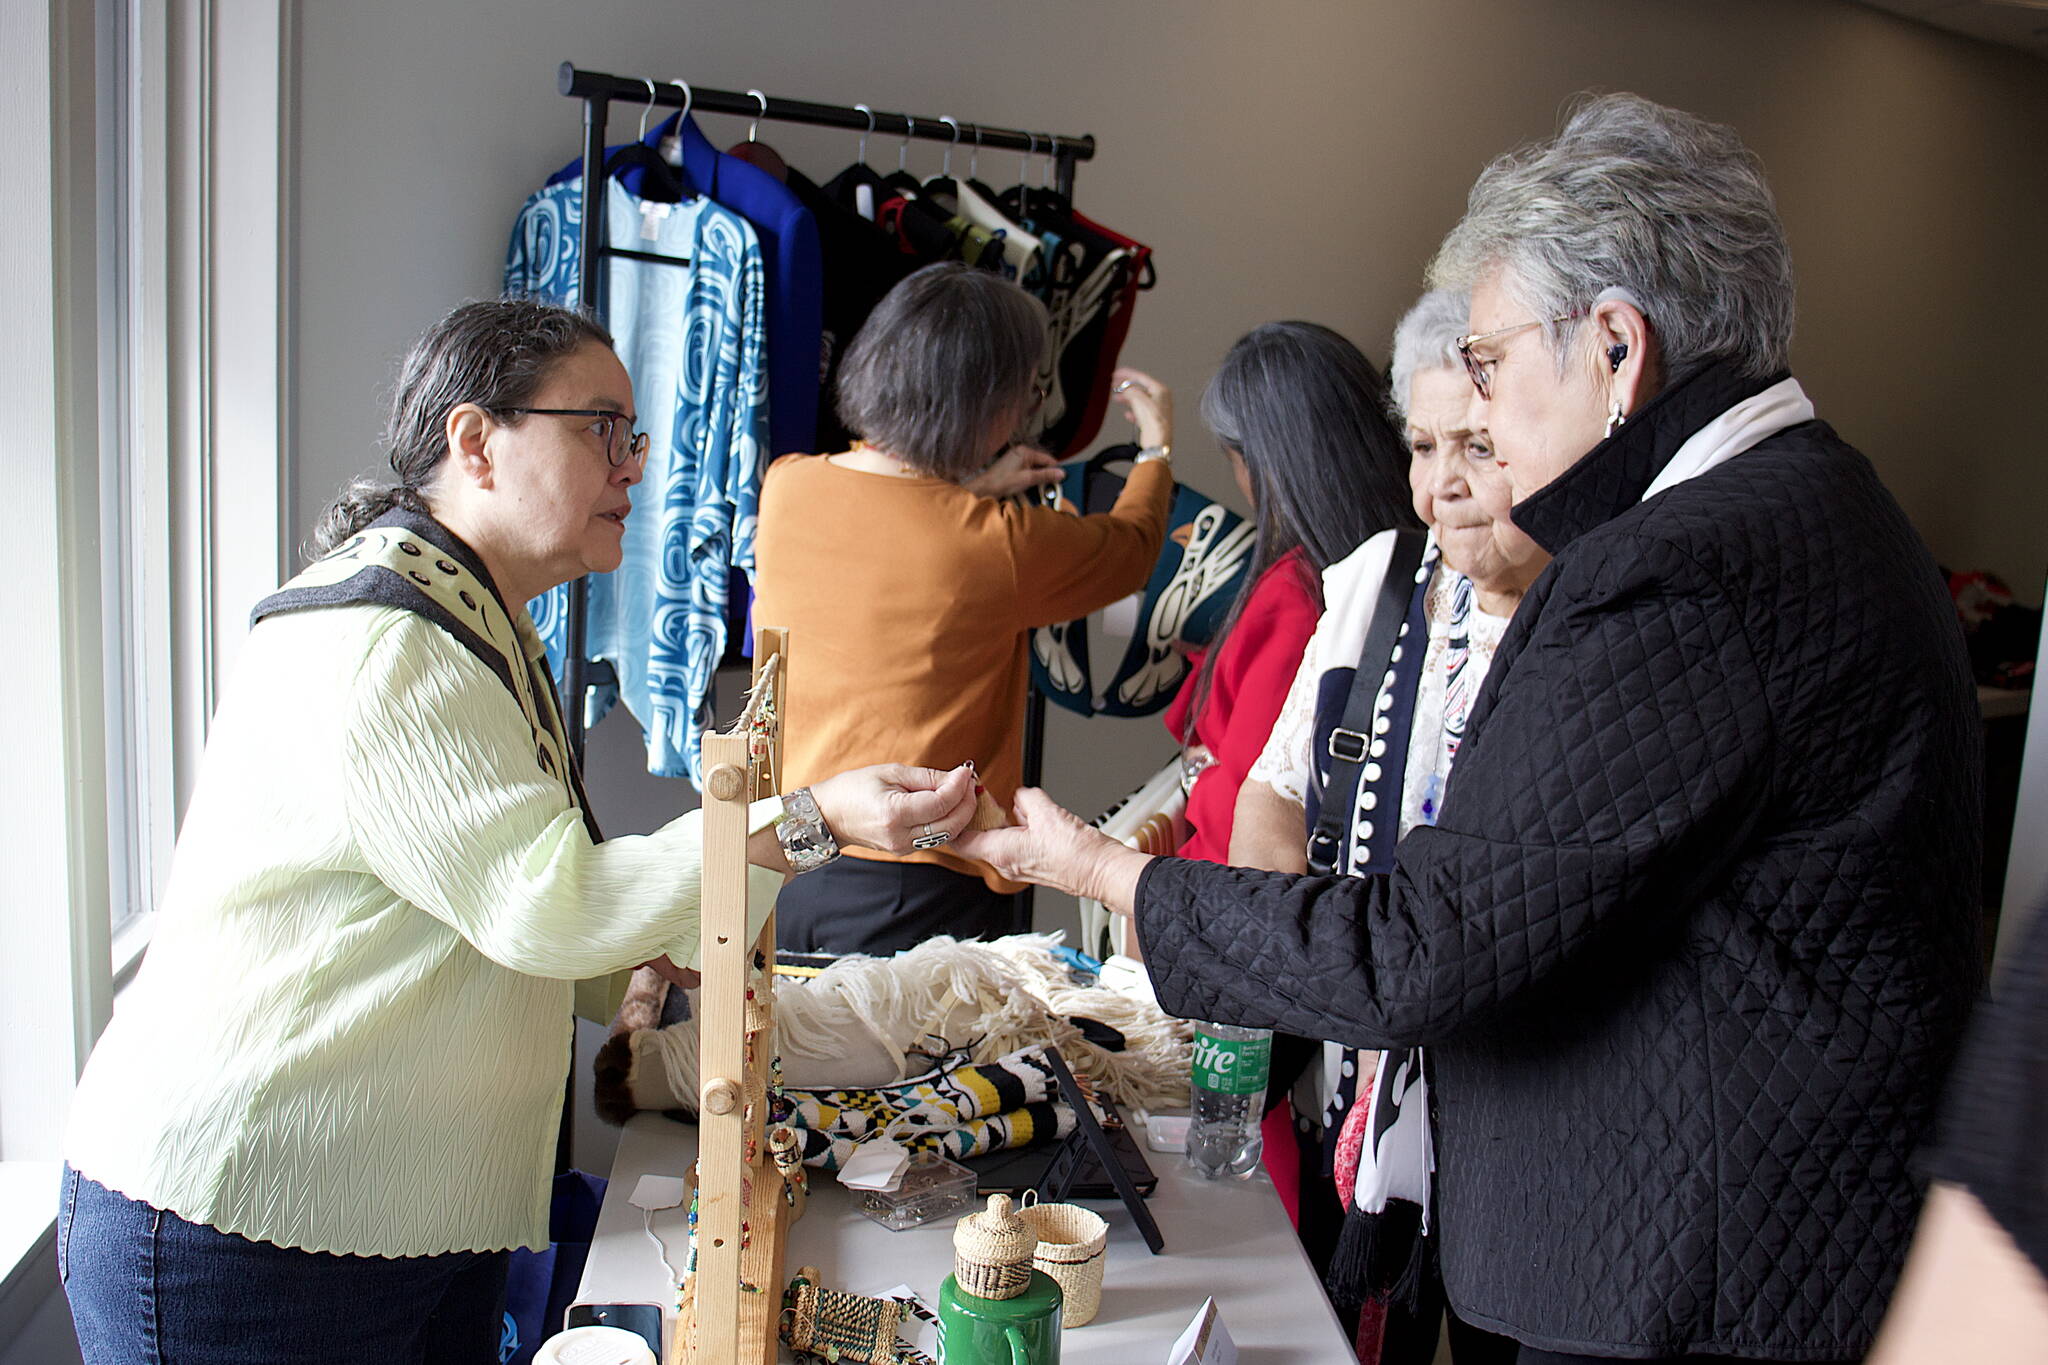 Dolly Garza, a former Ketchikan resident now living in Haida Gwaii, Canada, shows her handmade crafts to delegates Wednesday morning in a hallway at Elizabeth Peratrovich Hall during the 88th annual tribal assembly of the Central Council of the Tlingit and Haida Indian Tribes of Alaska. (Mark Sabbatini / Juneau Empire)